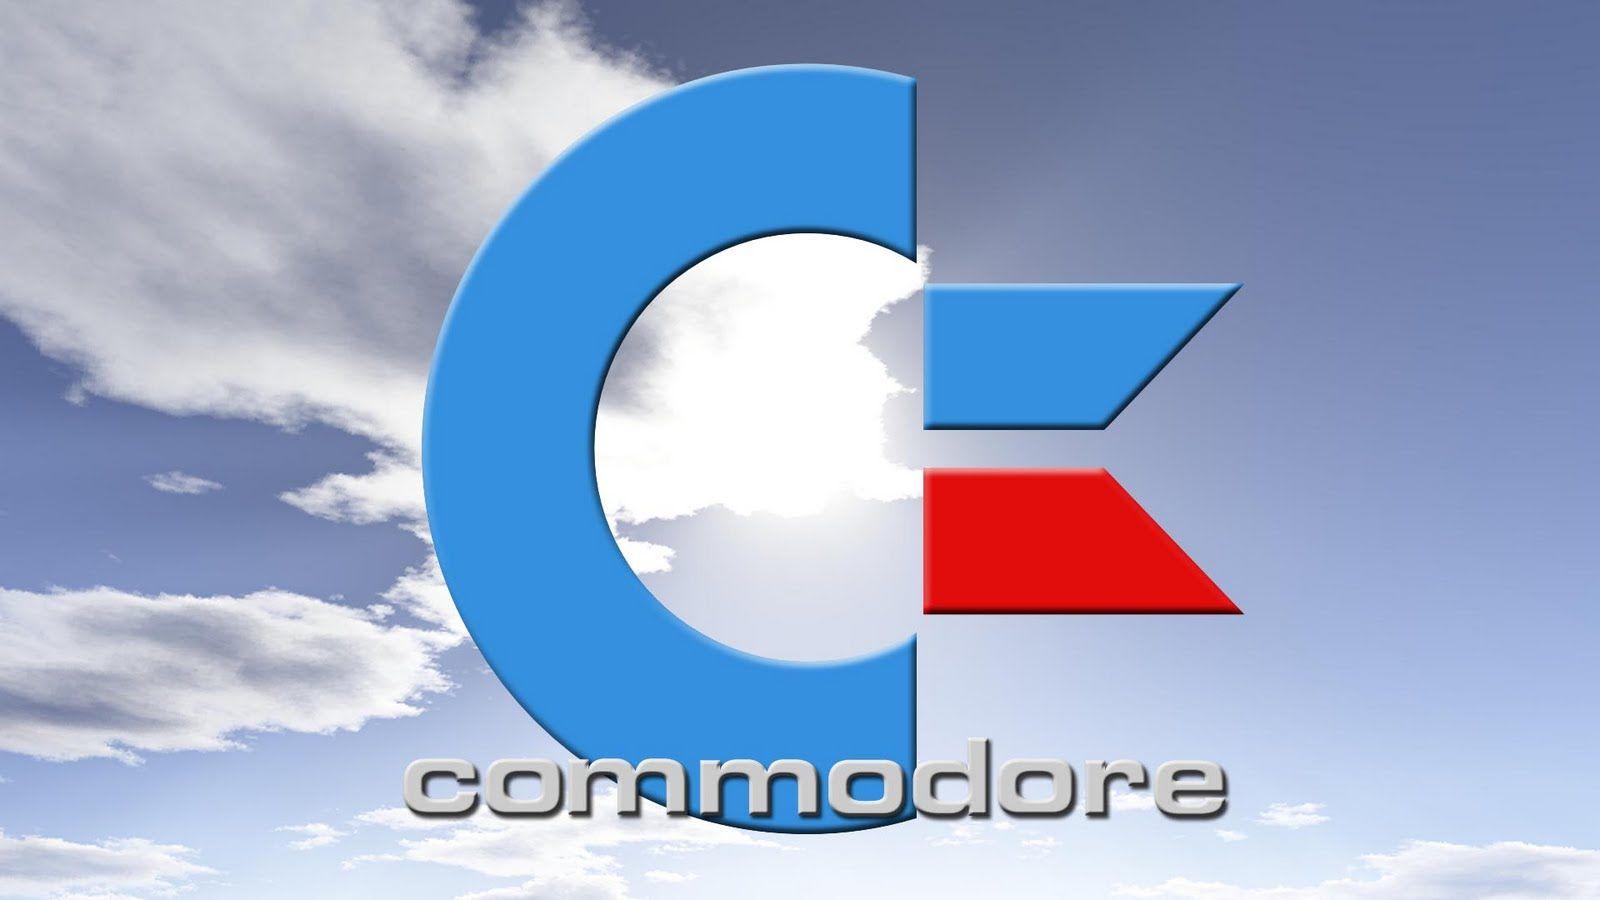 play online commodore 64